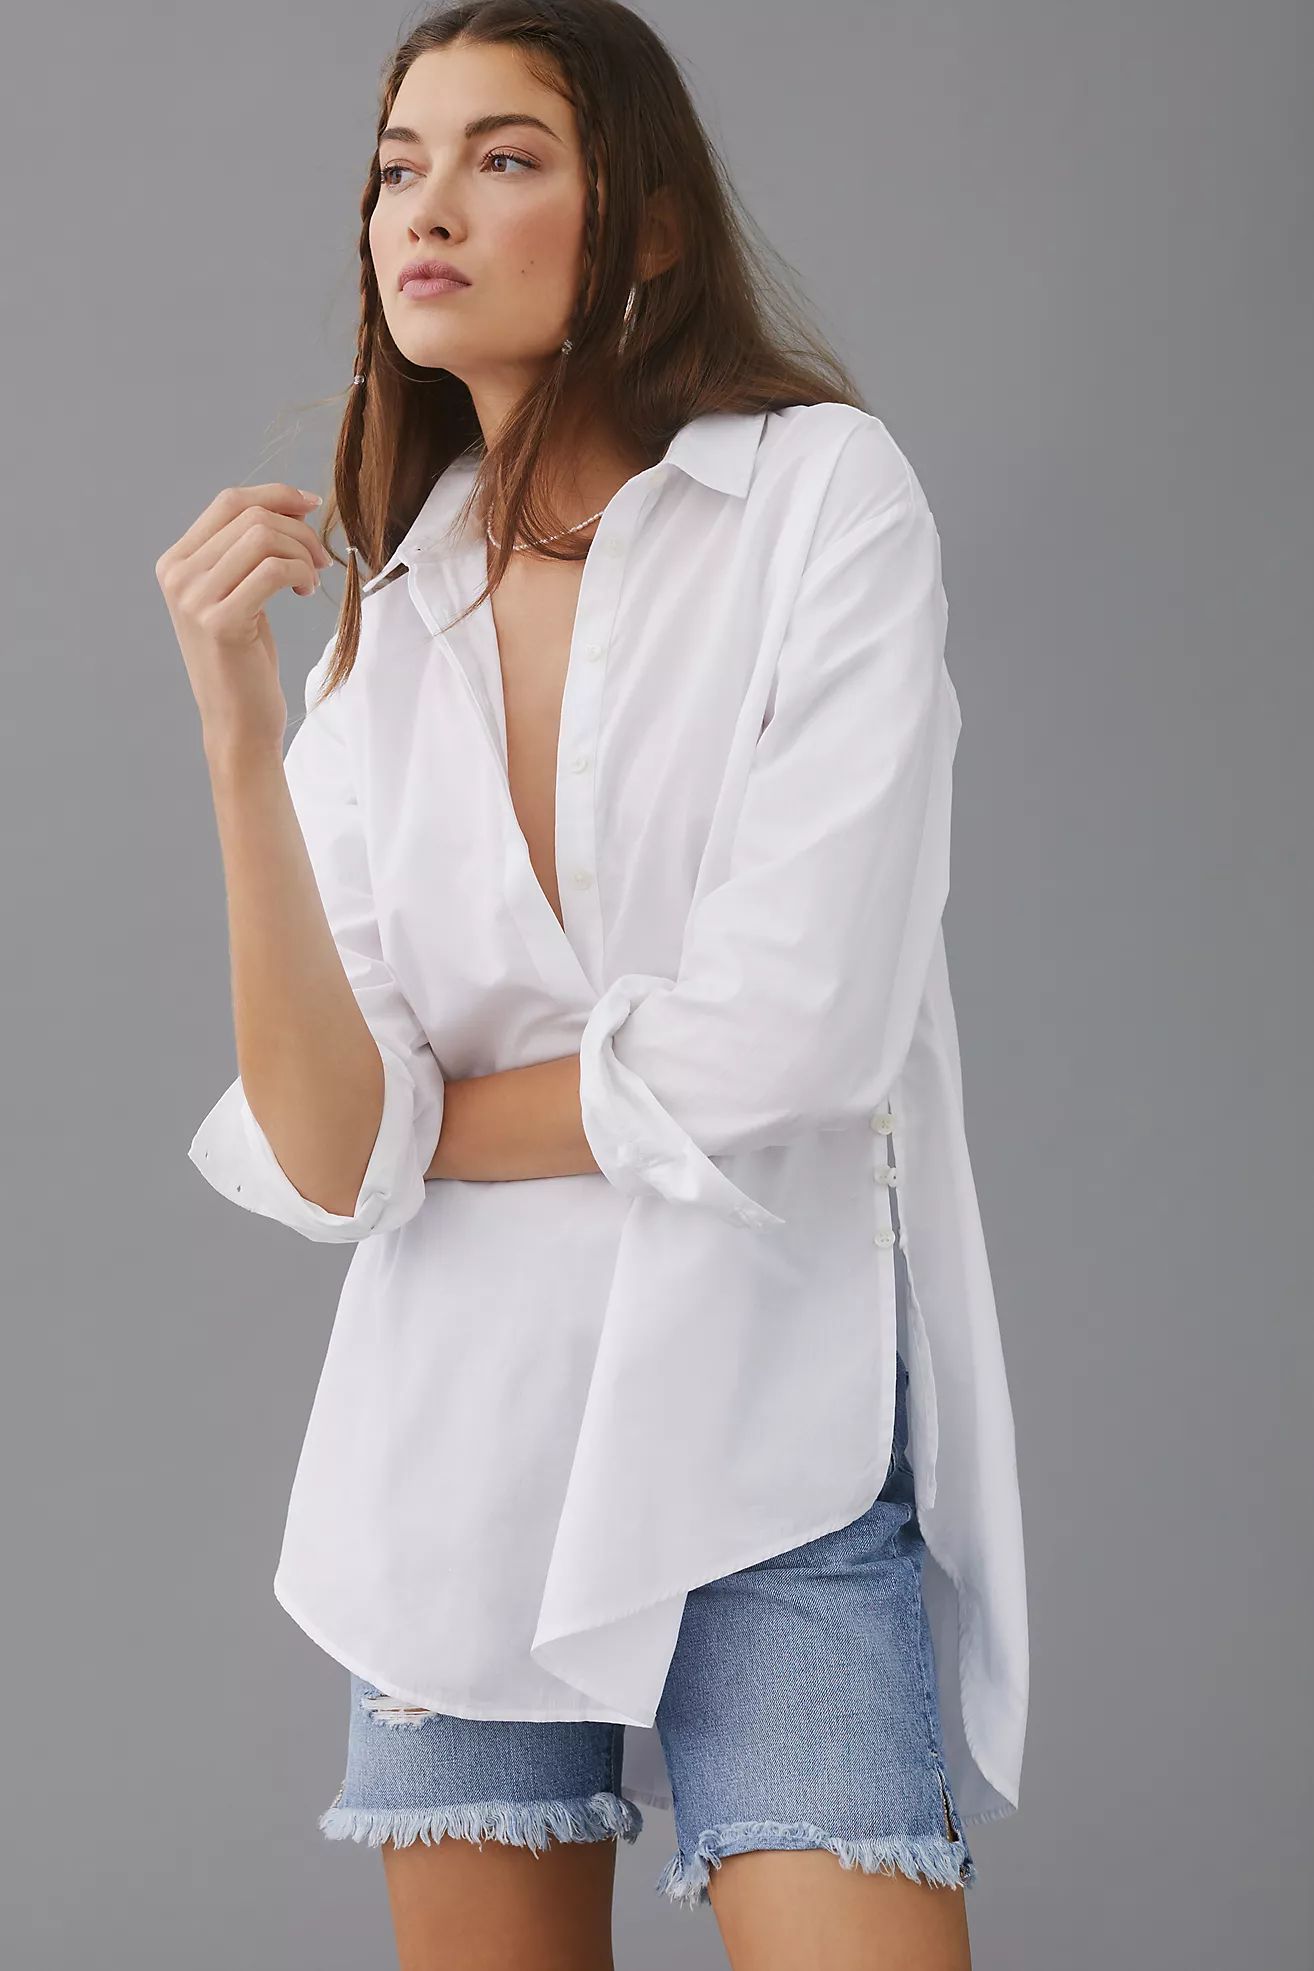 By Anthropologie Side-Button Tunic Blouse | Anthropologie (US)